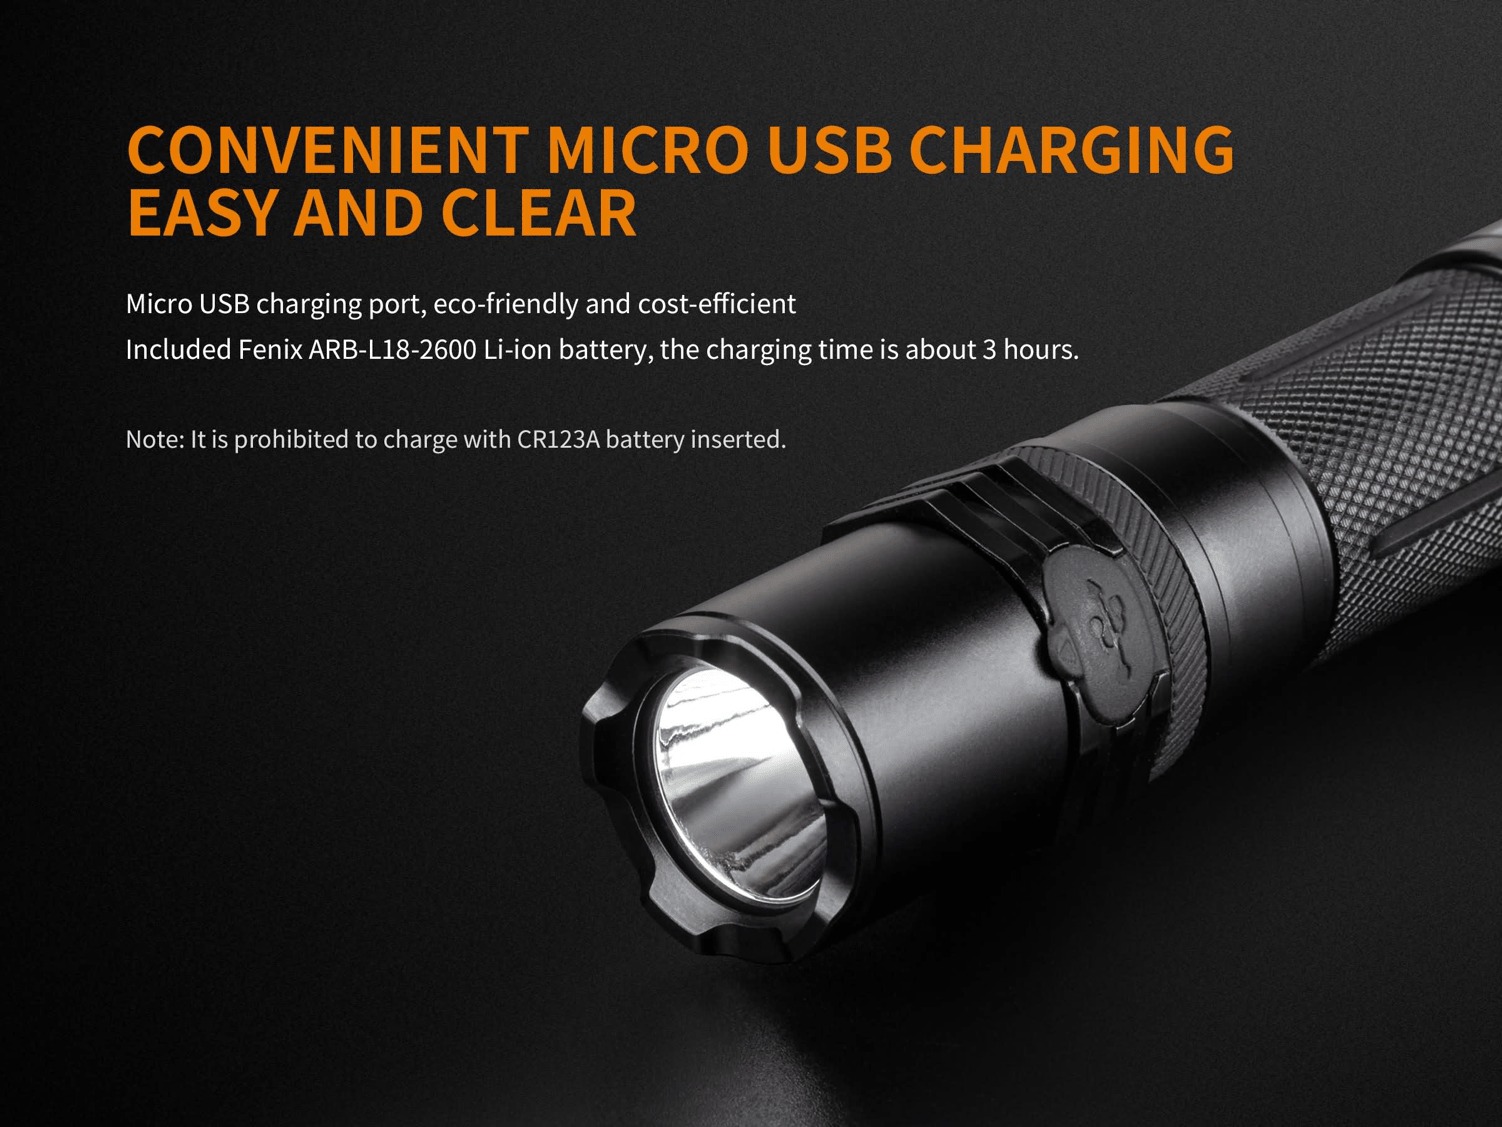 Fenix C6 LED Flashlight in India, 900 Lumens Powerful LED Torch, USB Rechargeable Handheld Light, Powered by Rechargeable Li-ion Battery, Compact, Everyday Carry Work Flashlight, economical Light in India